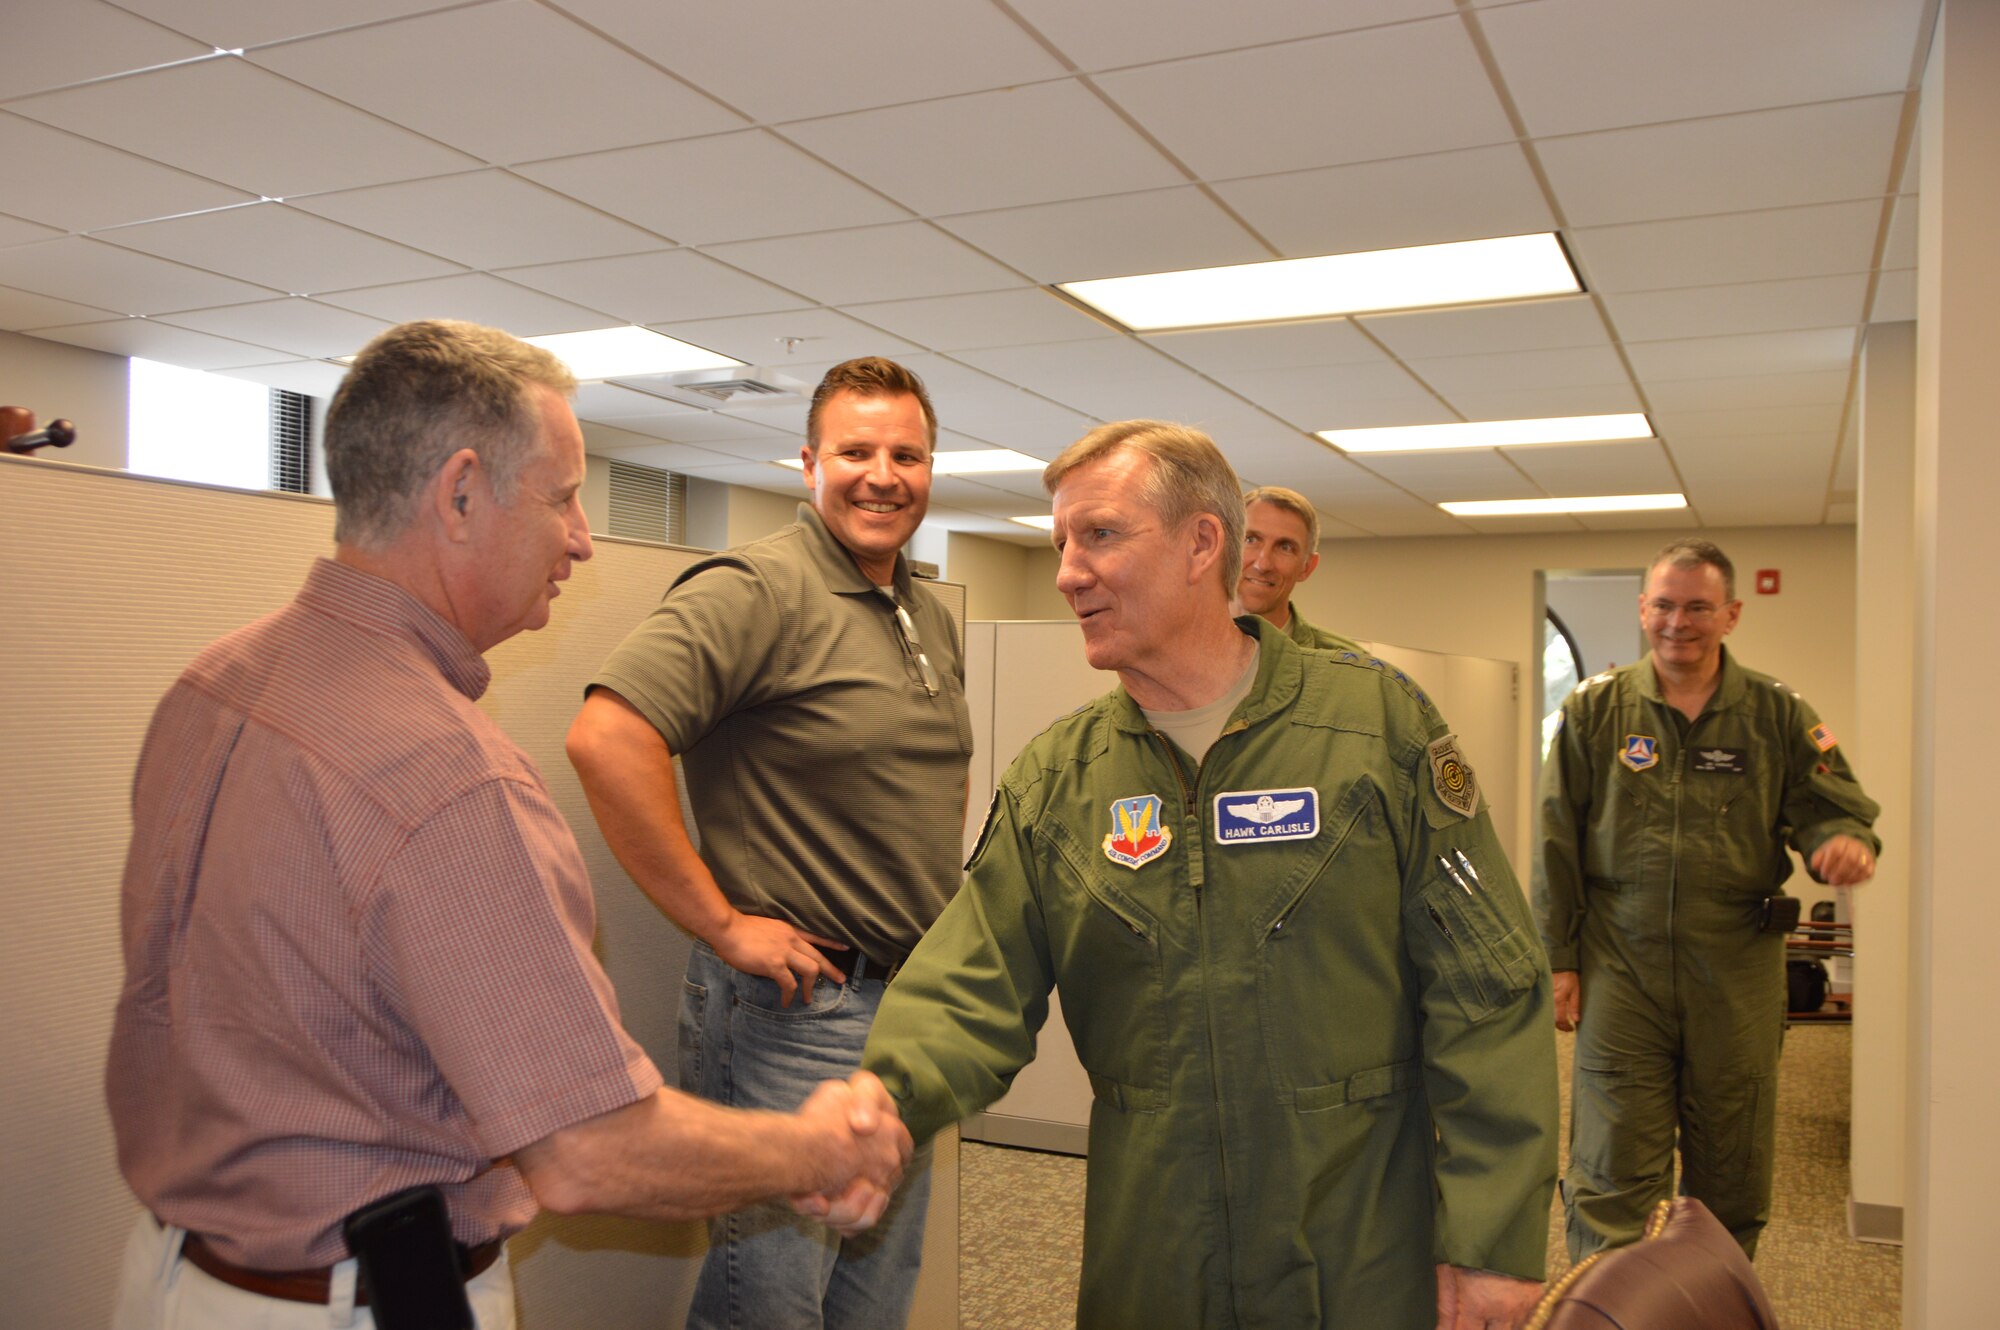 Gen. Hawk Carlisle, commander of Air Combat Command, greets Mark O’brien, 1st Air Force (Air Forces Northern) Civil Air Patrol-U.S. Air Force Liaison Officer, during a visit to CAP National Headquarters at Maxwell Air Force Base, Ala., June 18. While there, the general met with CAP leadership and toured CAP aircraft. (Air Force Photo Released/Mary McHale)